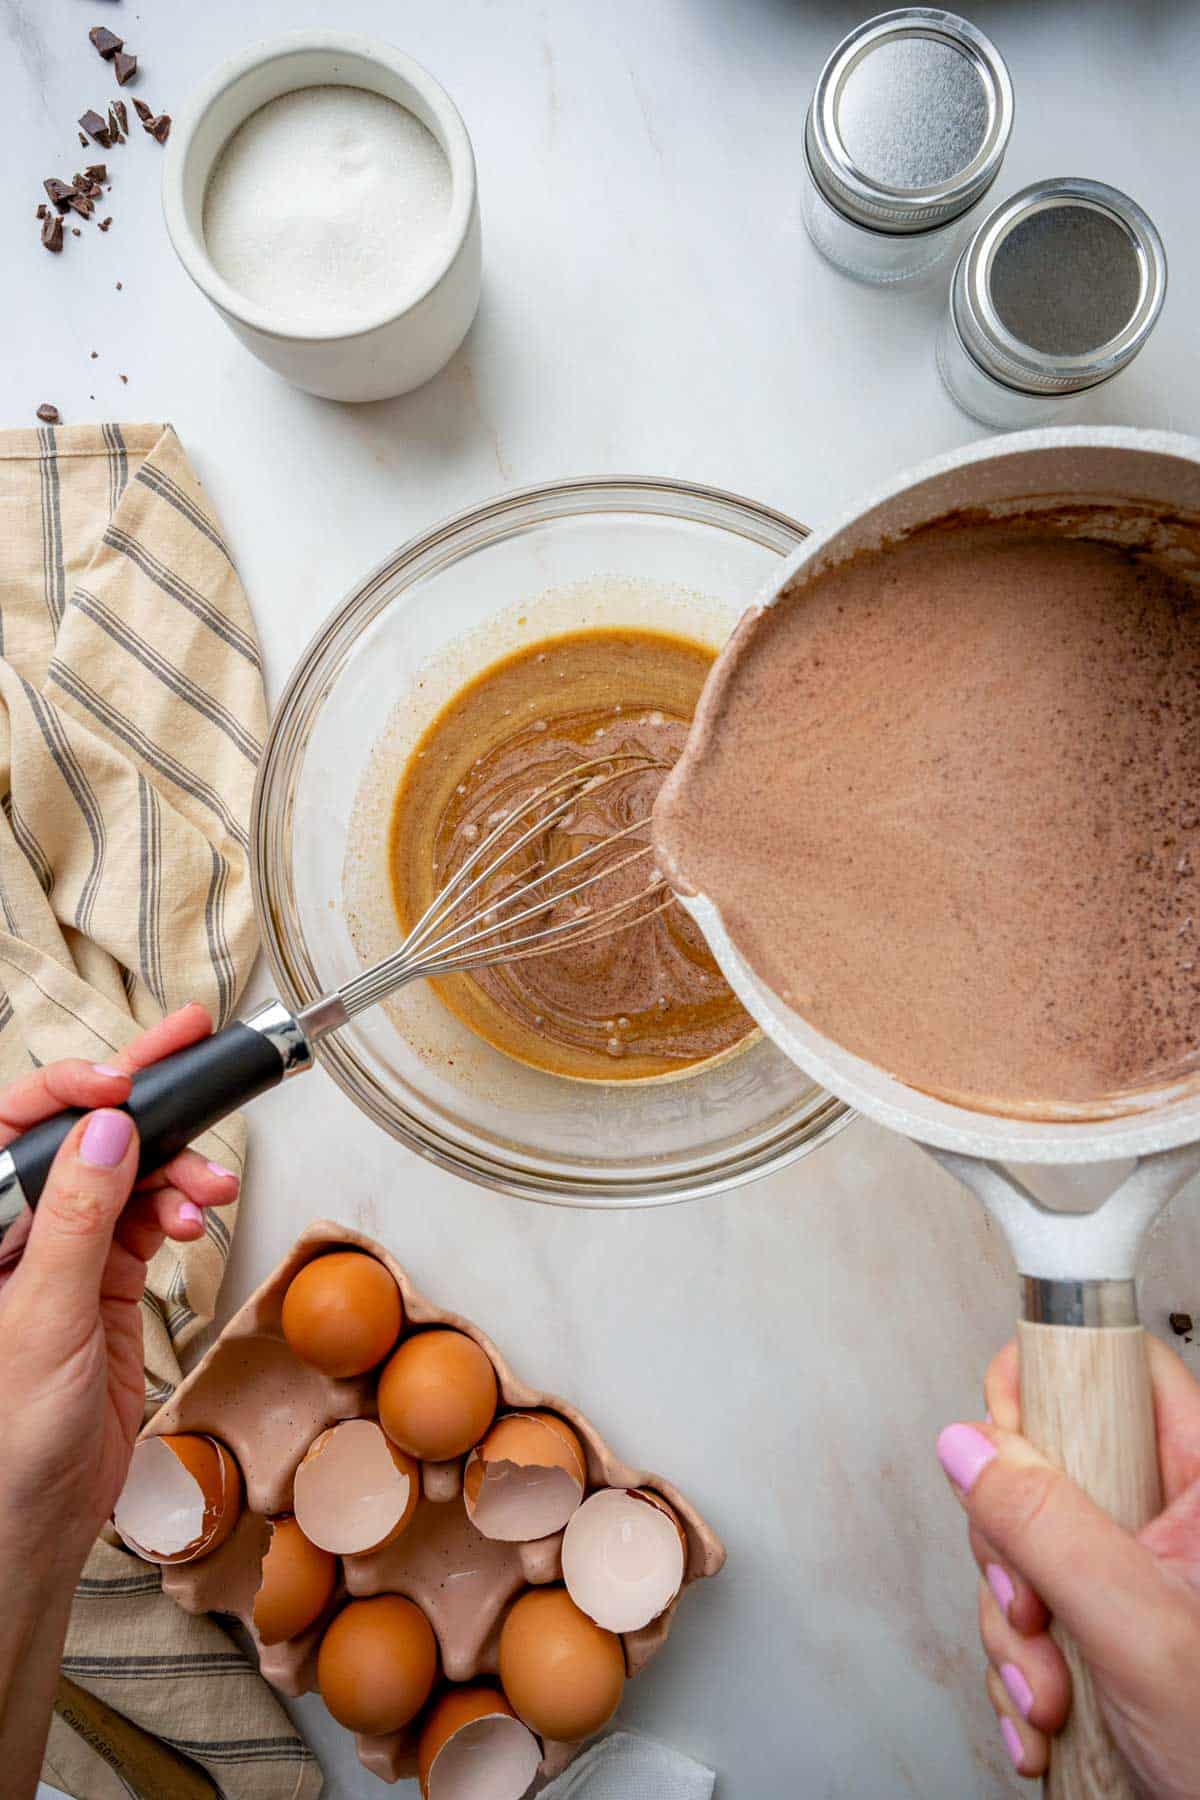 a brown chocolate mixture being poured into egg yolks while whisking